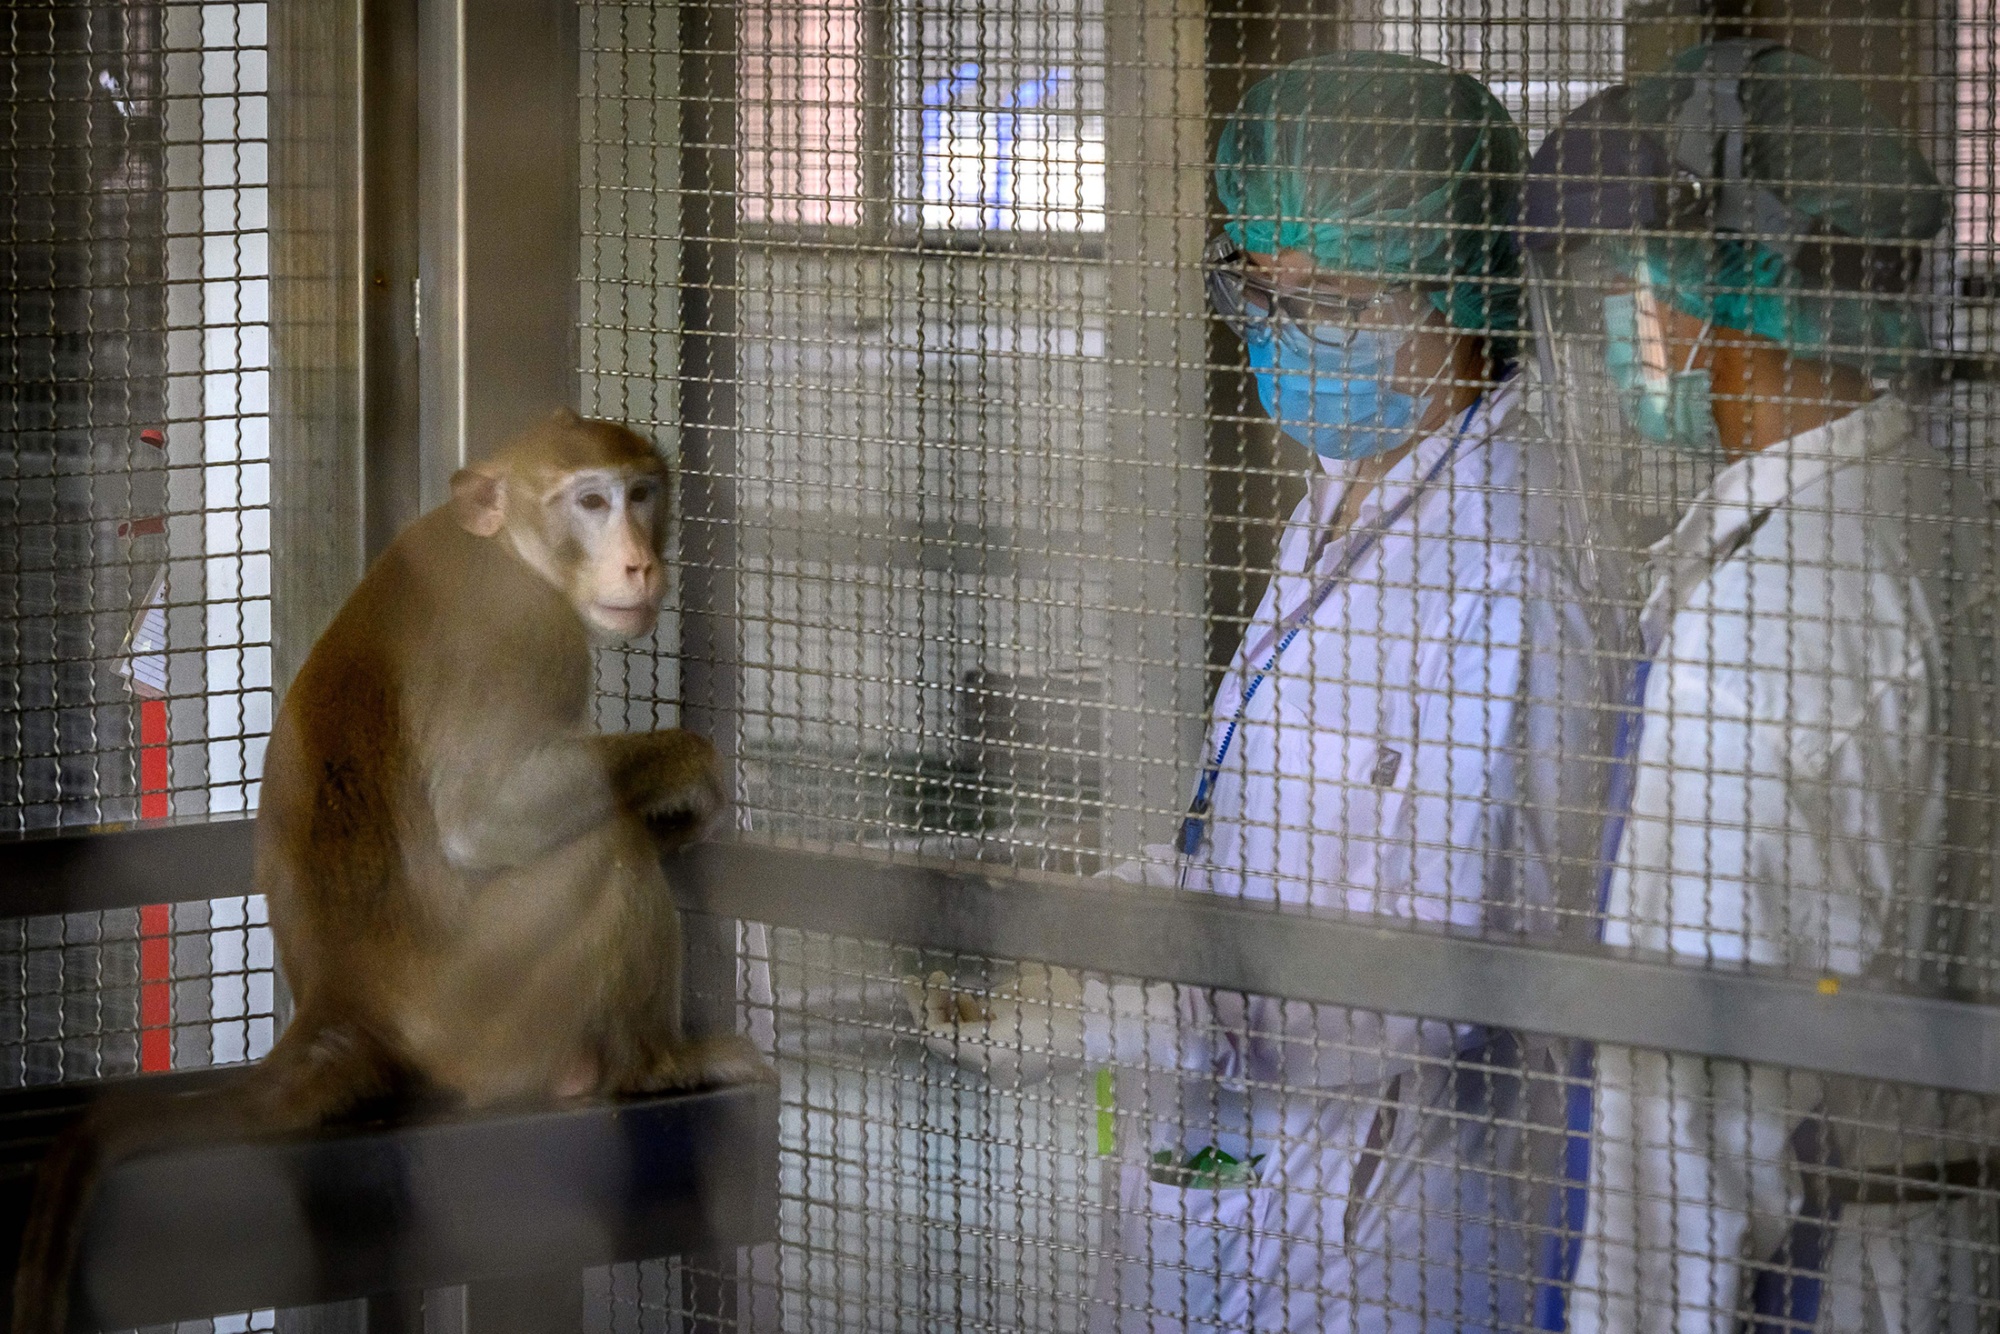 We Don't Need More Monkeys, We Need a New Strategy to Test Vaccines